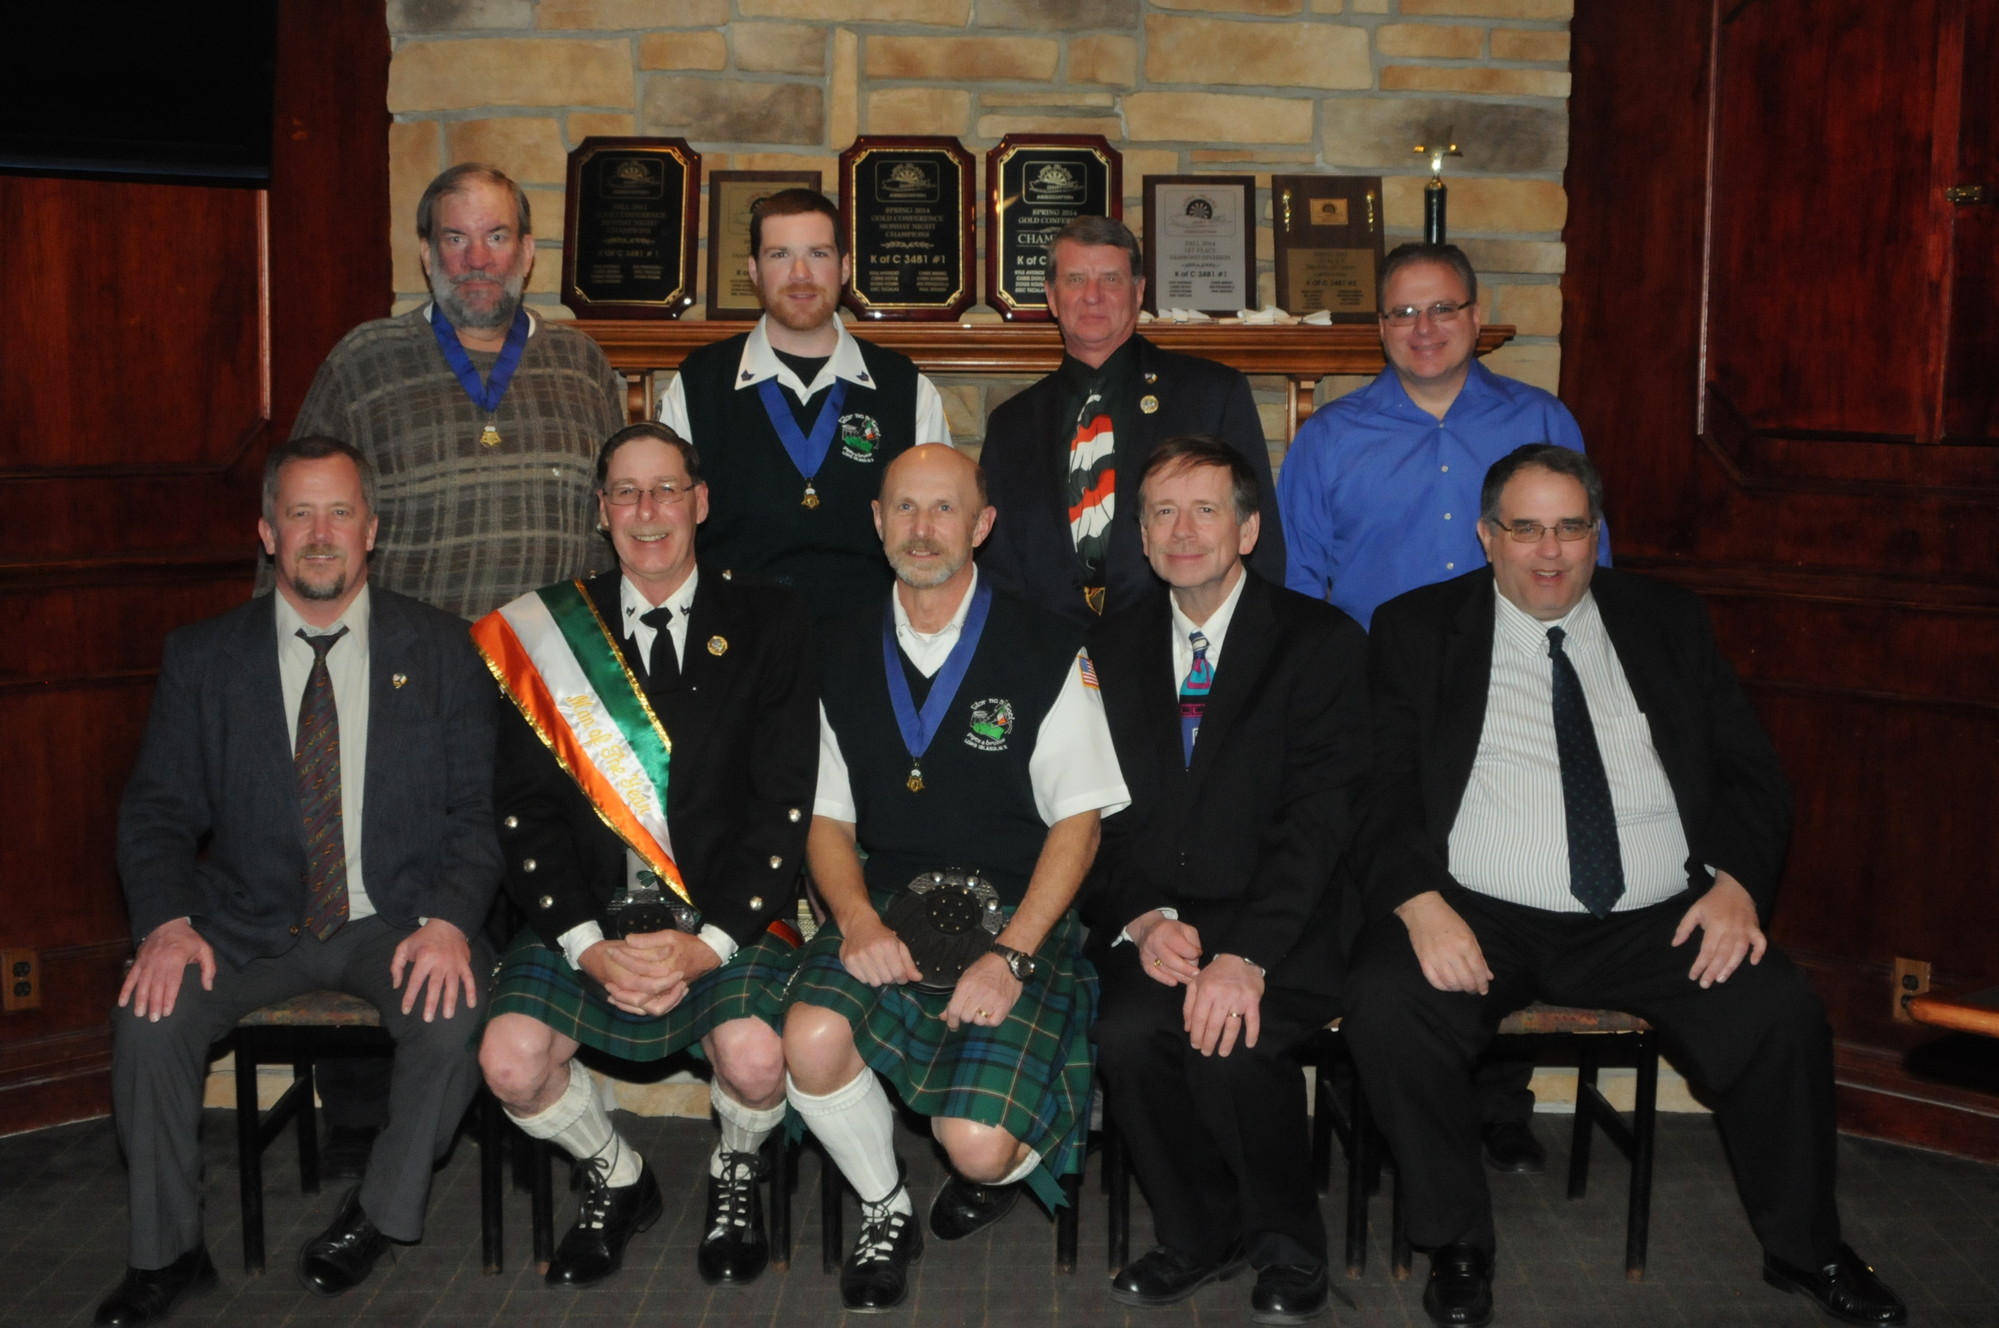 Ancient Order of Hibernians Division 14 Executive Board, Sitting Left to right, Jim Henry, Marty Abrams, Tom Piderit, Mike Lavin, Bill O’Hara.  Standing Left to Right, Larry Budd, Ryan Costigan of Oceanside, Joe Gavin, Chris McNulty.